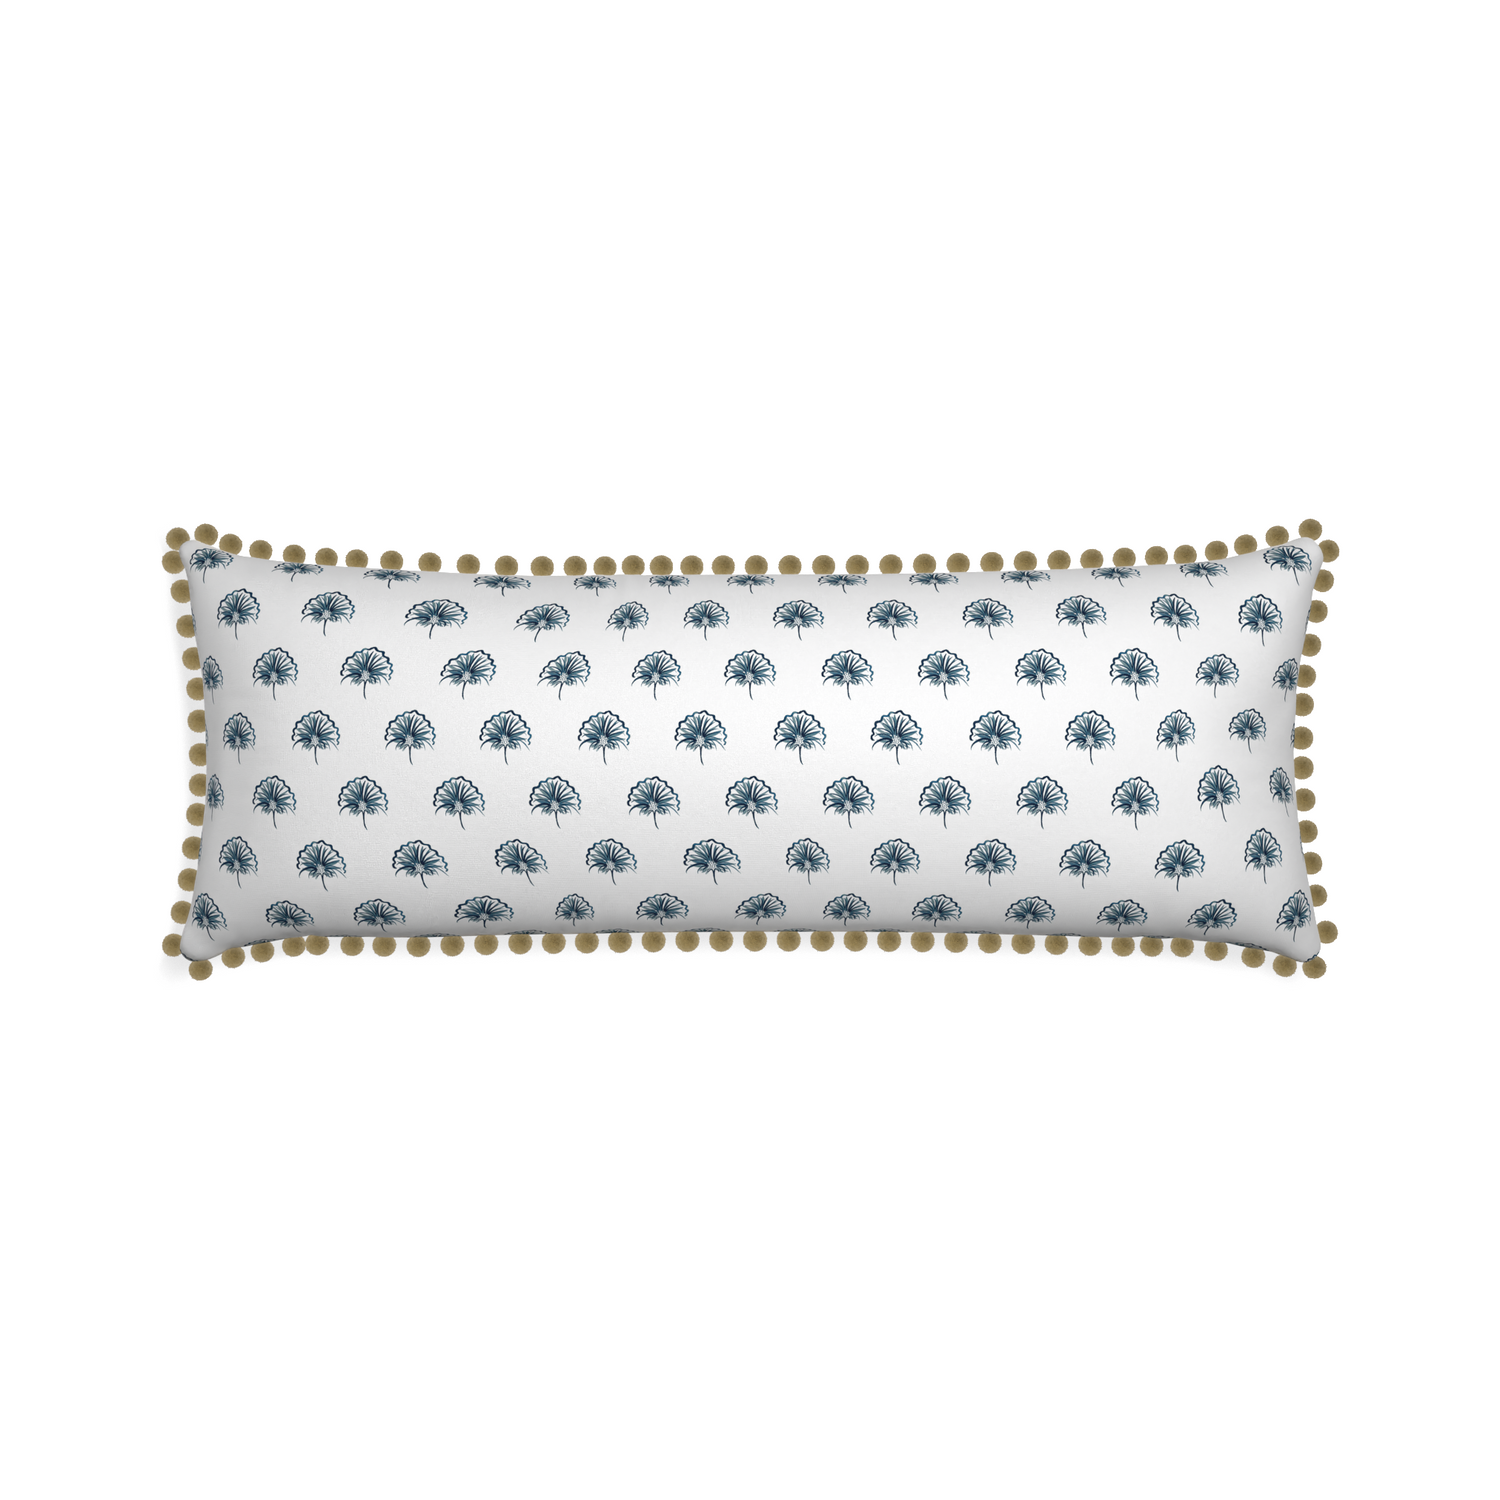 Xl-lumbar penelope midnight custom pillow with olive pom pom on white background